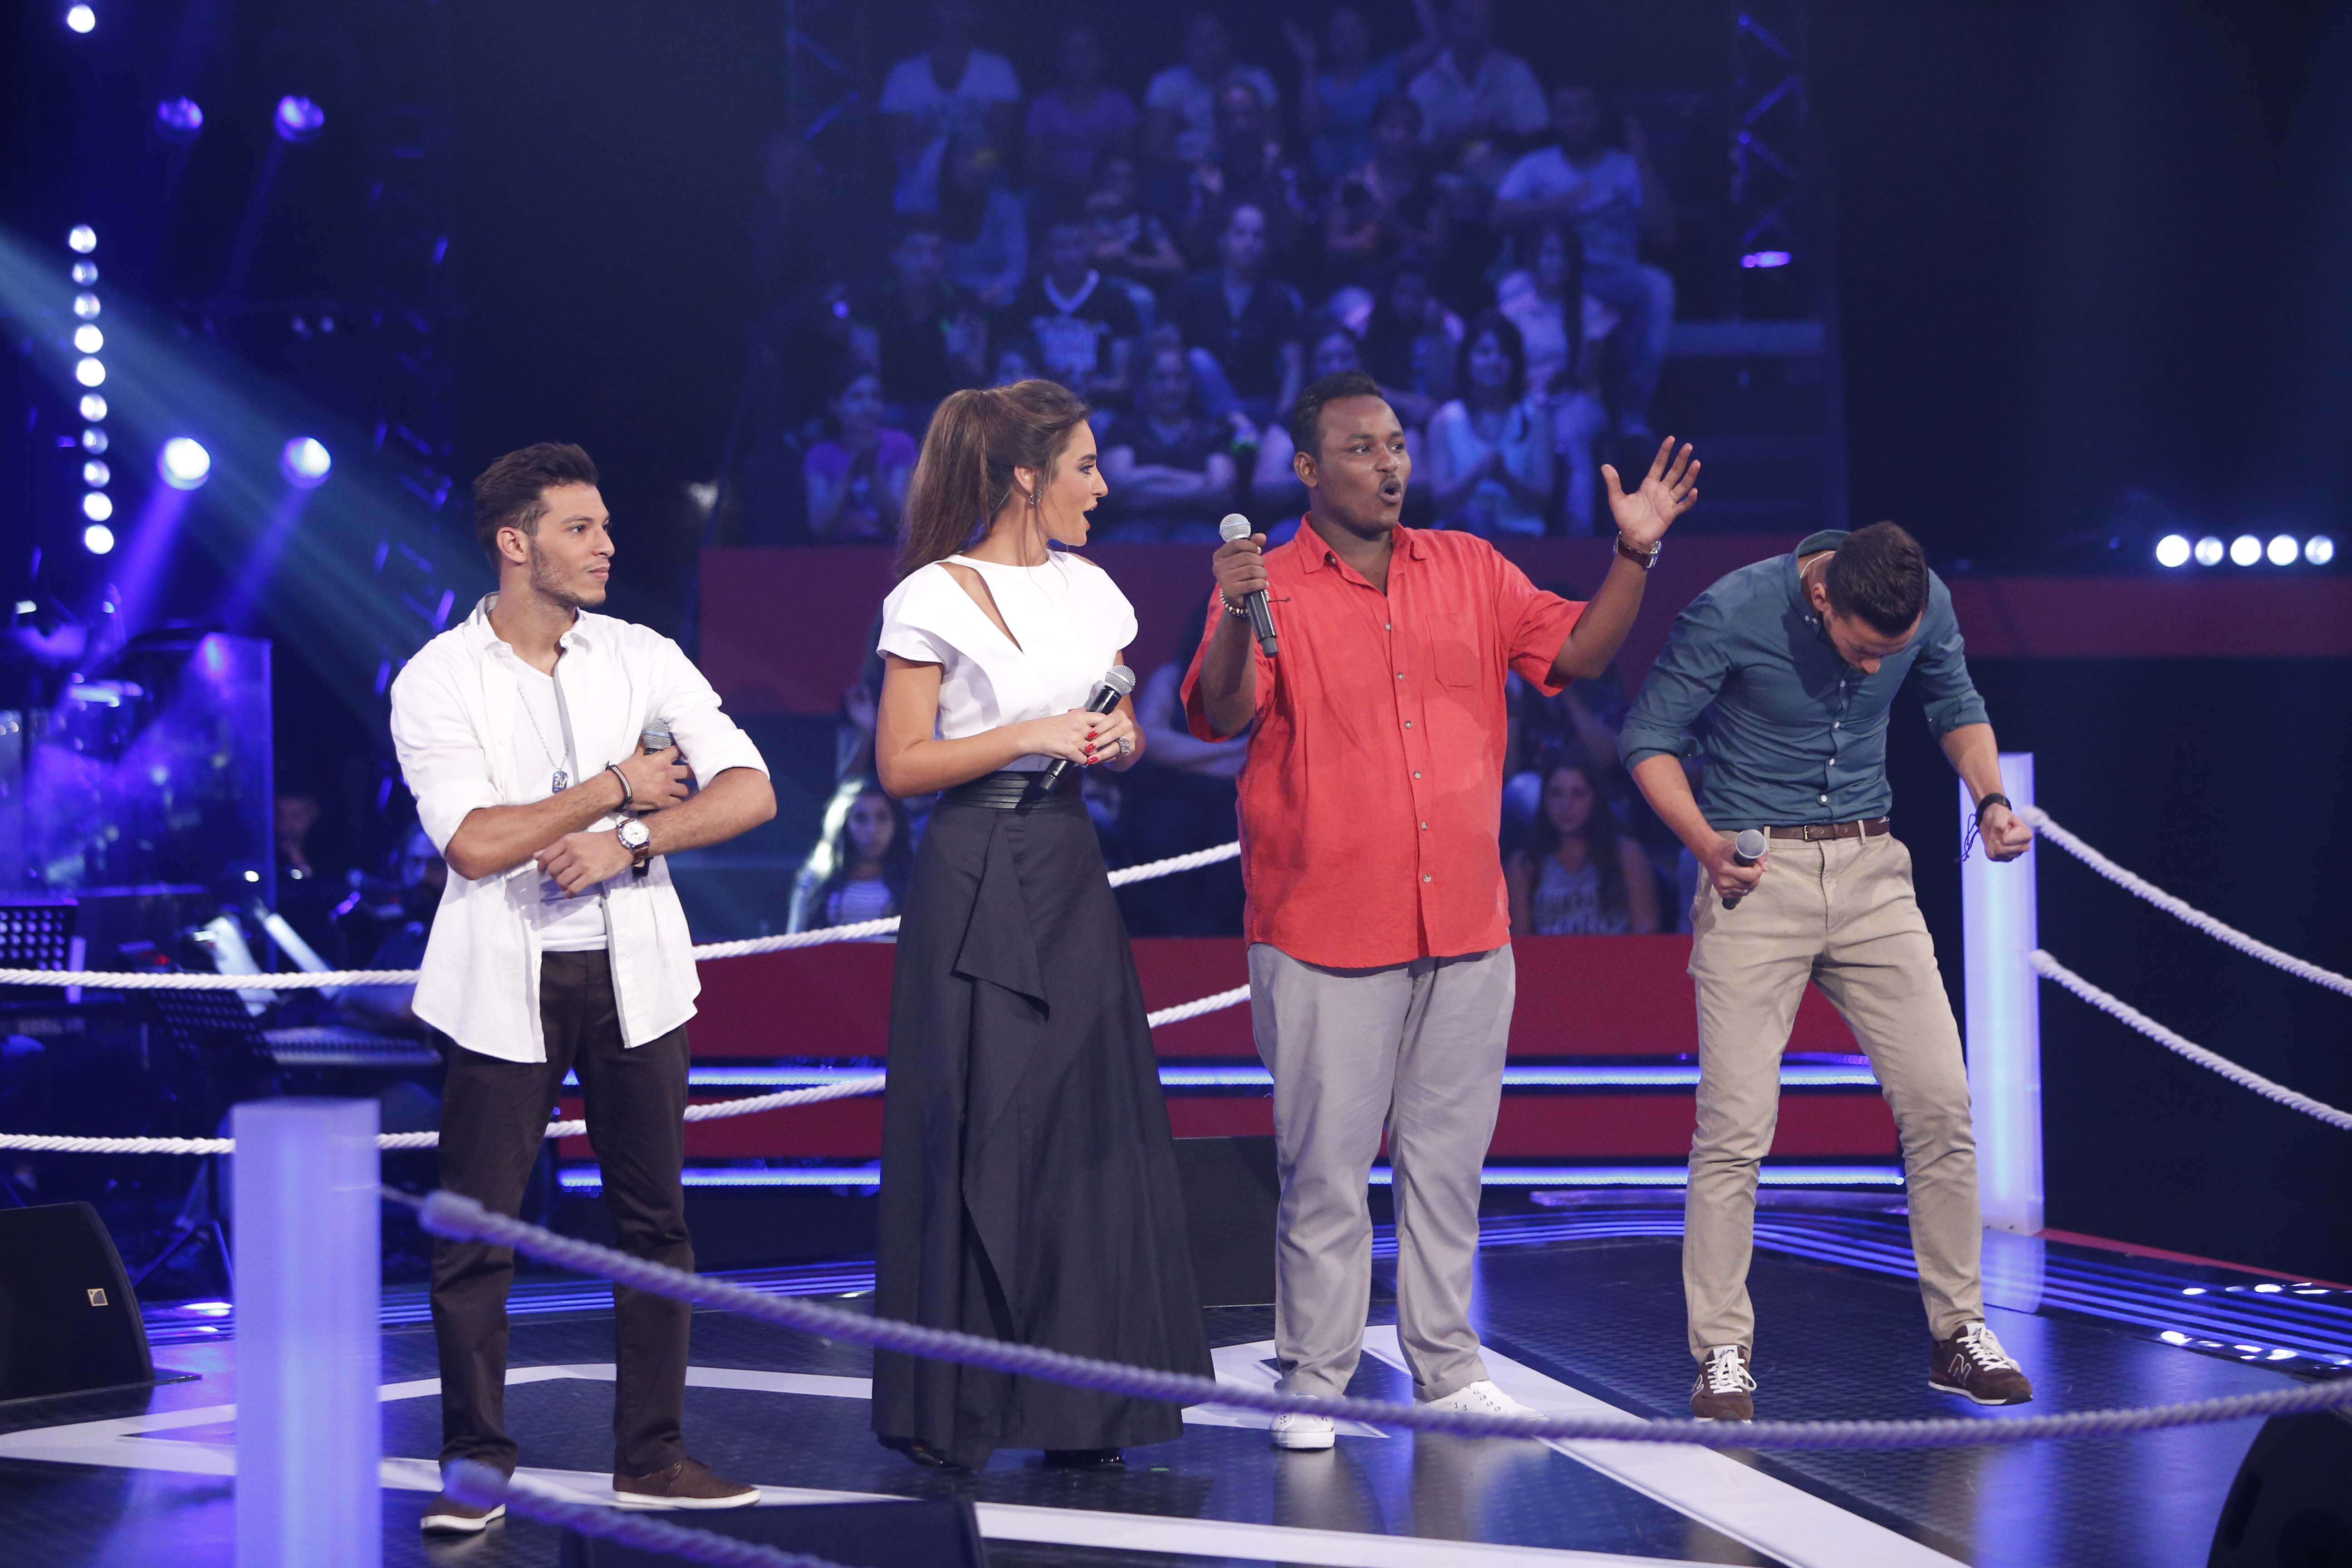 MBC1 & MBC MASR the Voice S3 - Battle 1 - results moment - Younes, Mohammed & Abdelsamad